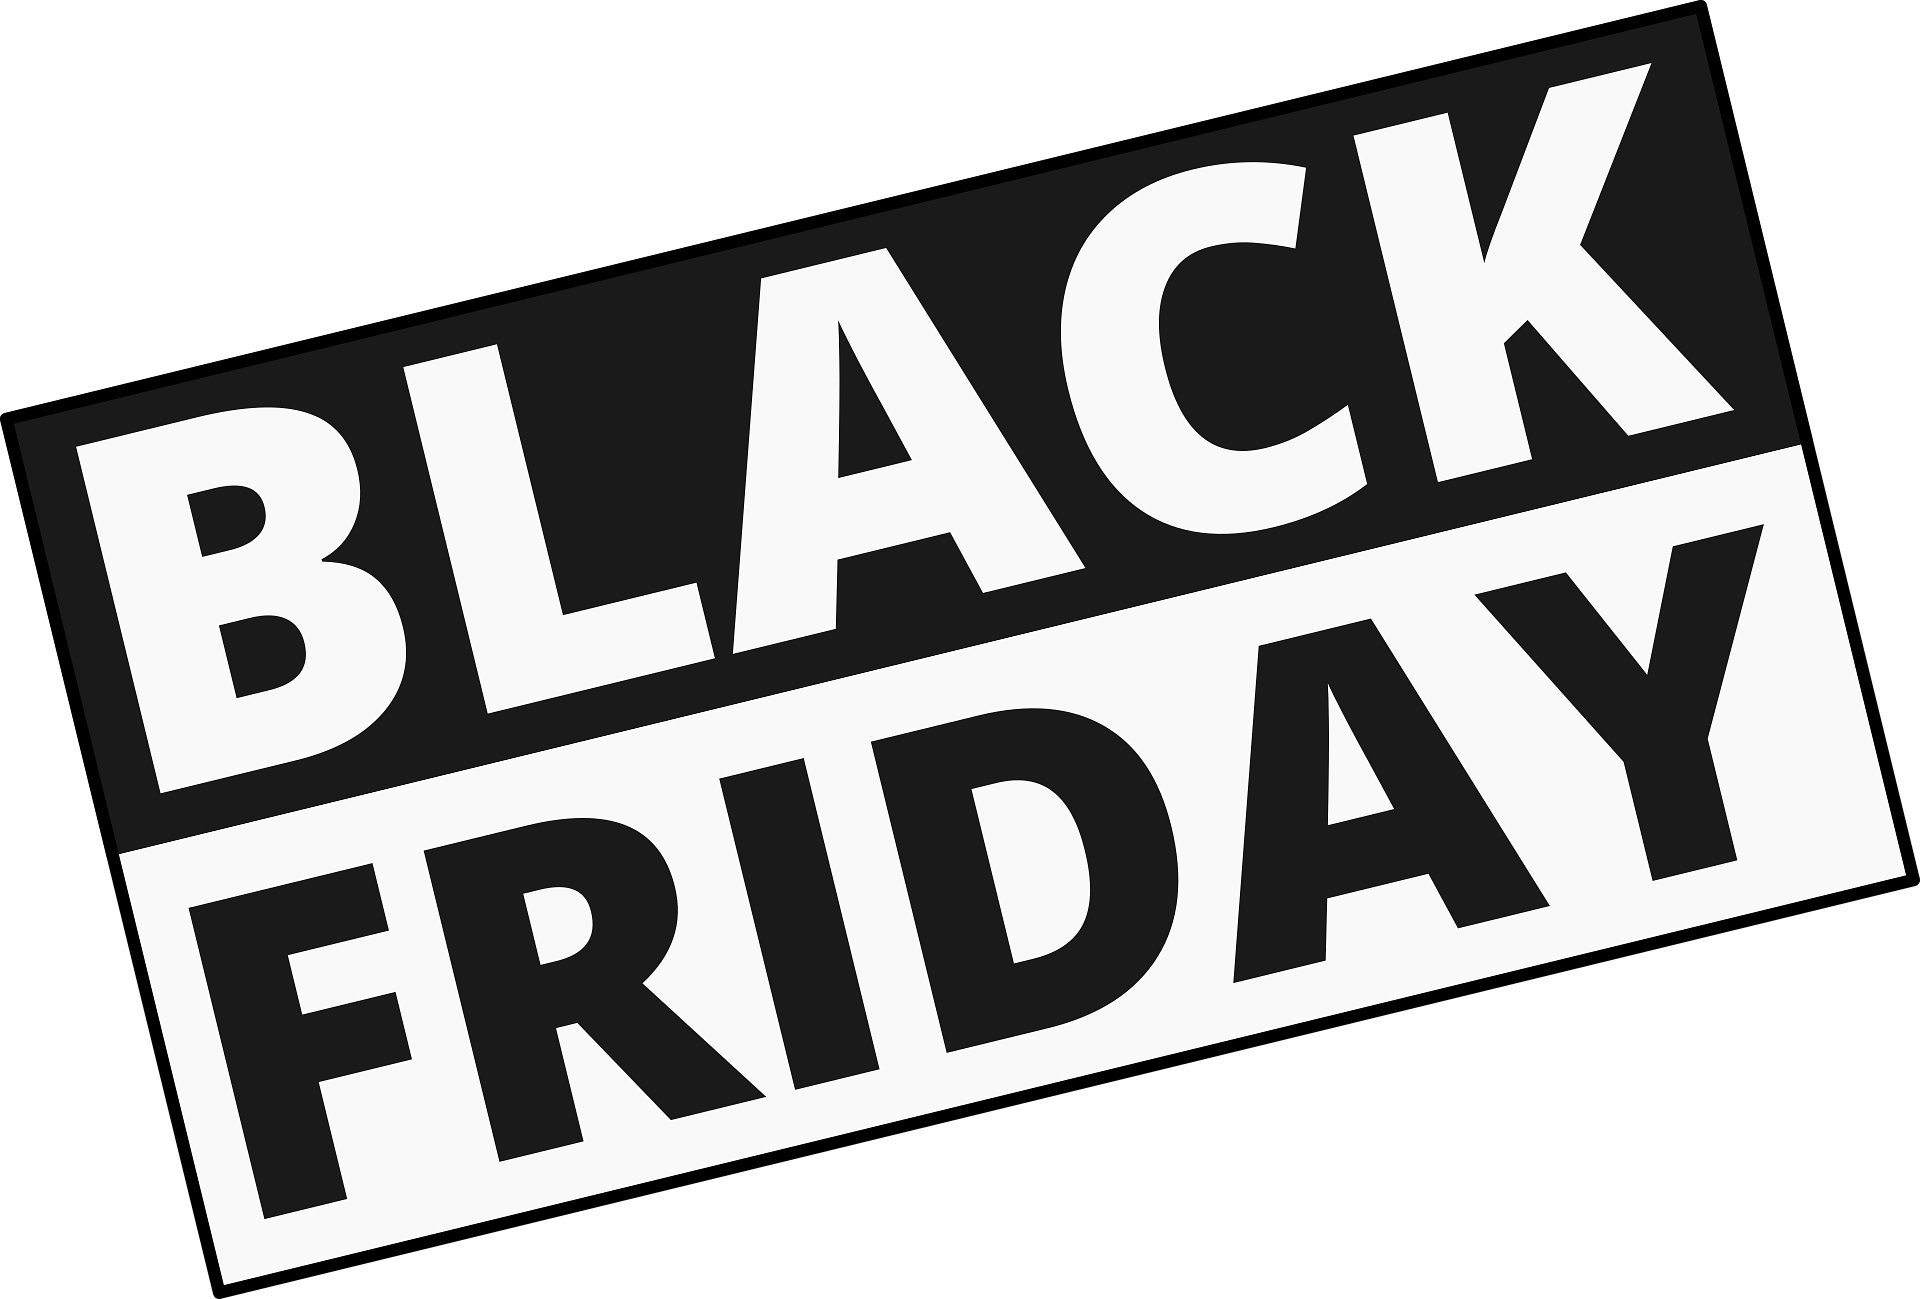 Black Friday marketing tricks and four ways to stop yourself falling for them